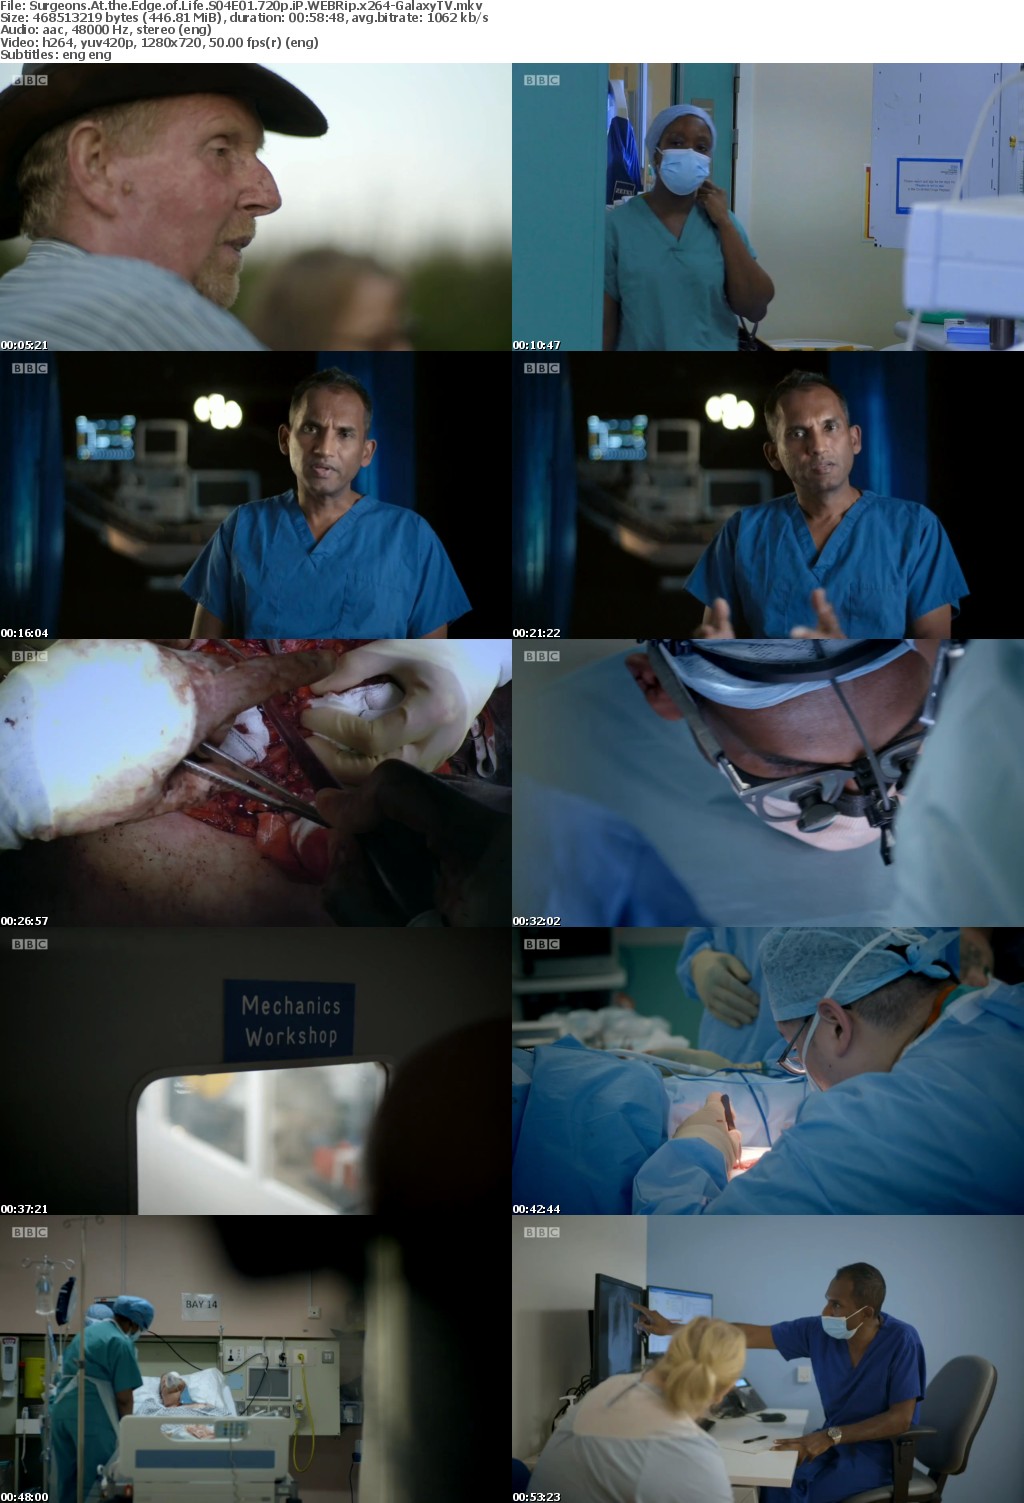 Surgeons At The Edge Of Life S04 COMPLETE 720p iP WEBRip x264-GalaxyTV